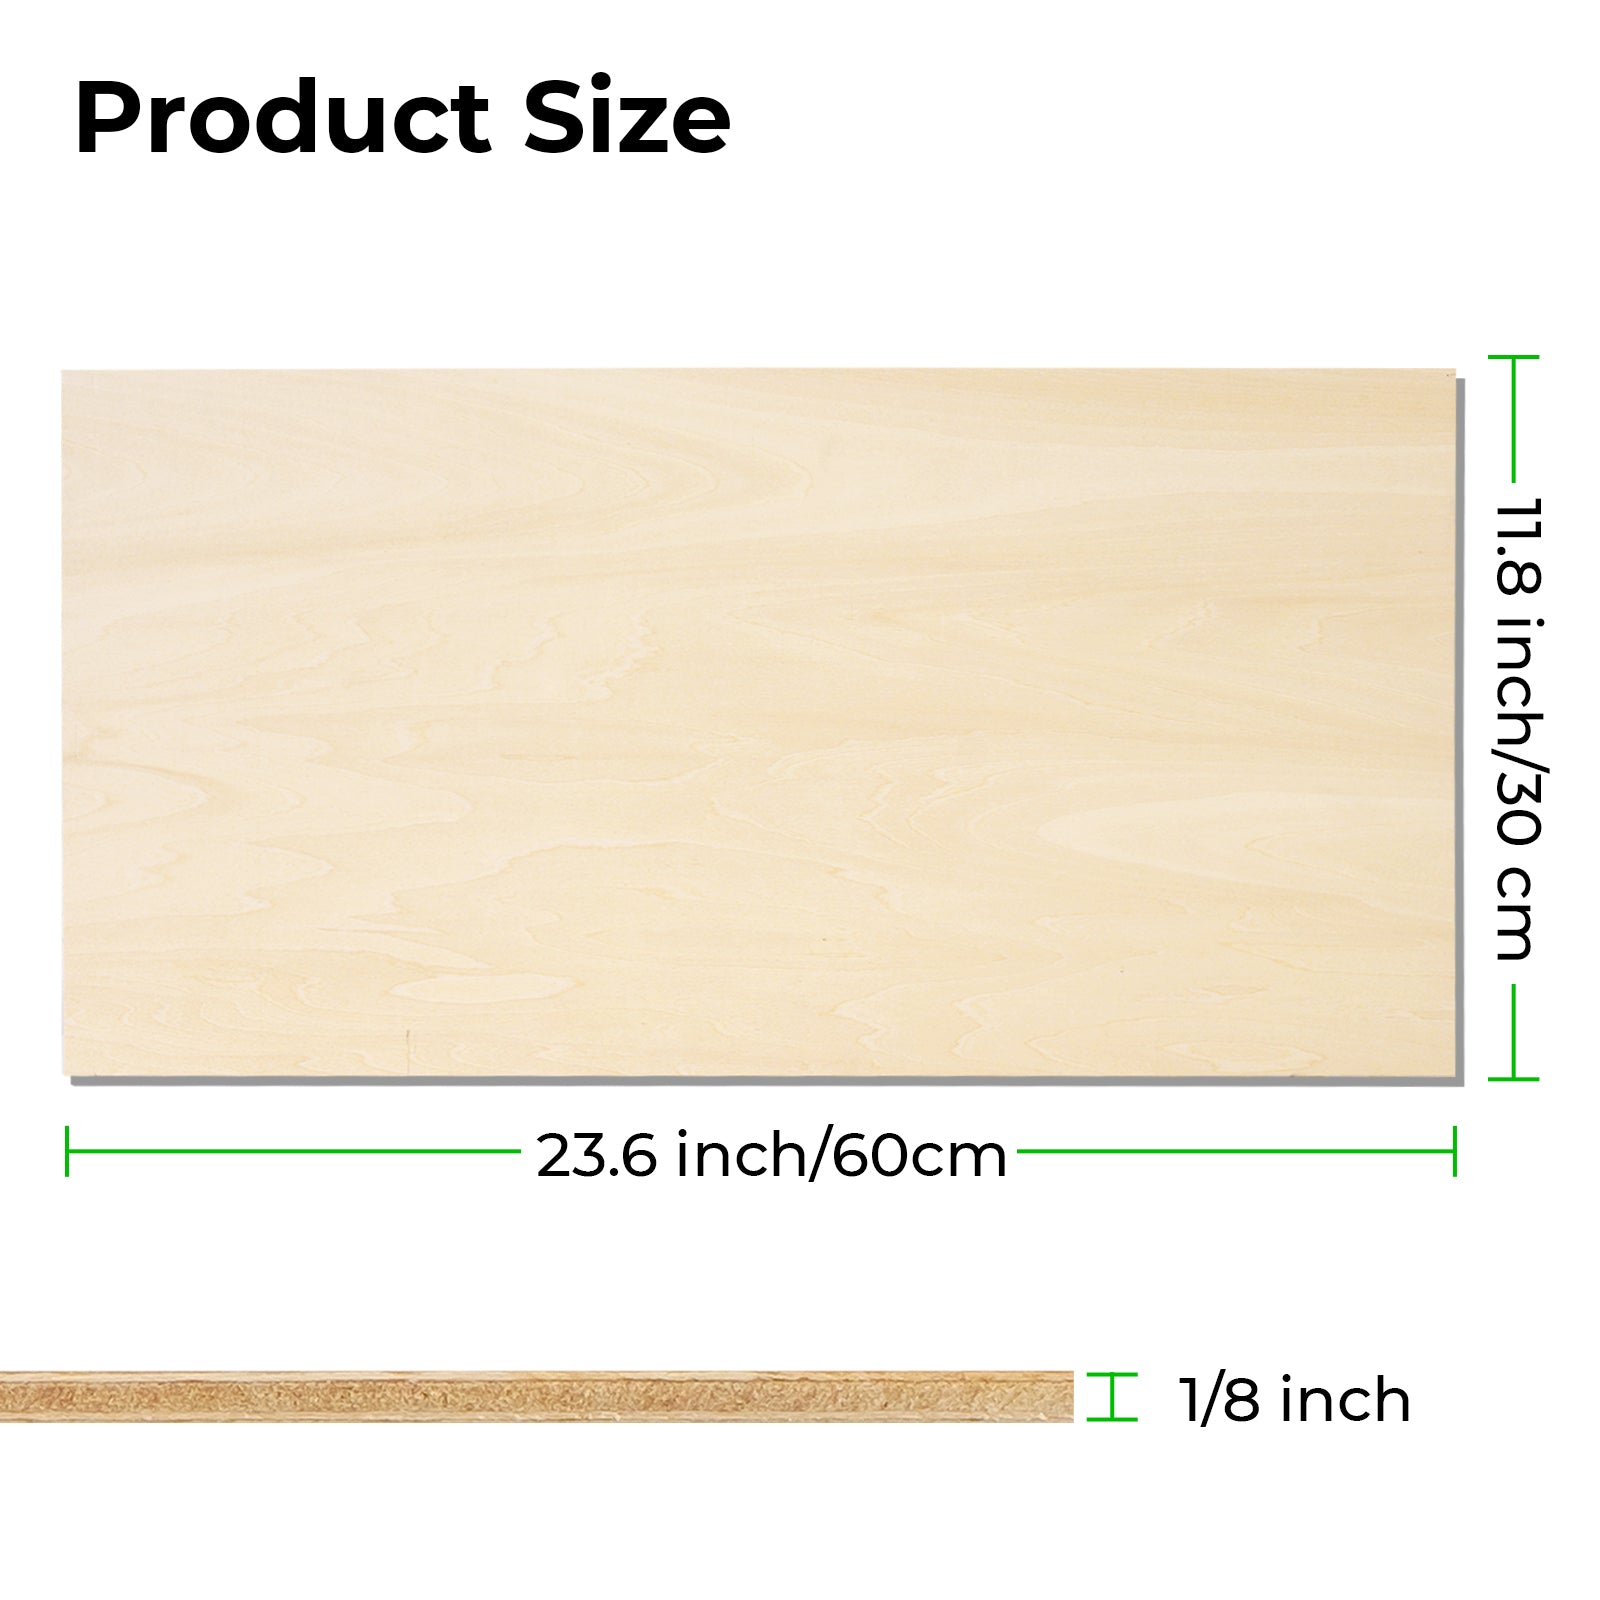  ROBOTIME 6 Pcs Basswood Sheets 1/8, 3mm Basswood for Laser  Cutting, 1/8 Plywood Thin Wood Sheets for Craft Projects, 12x20